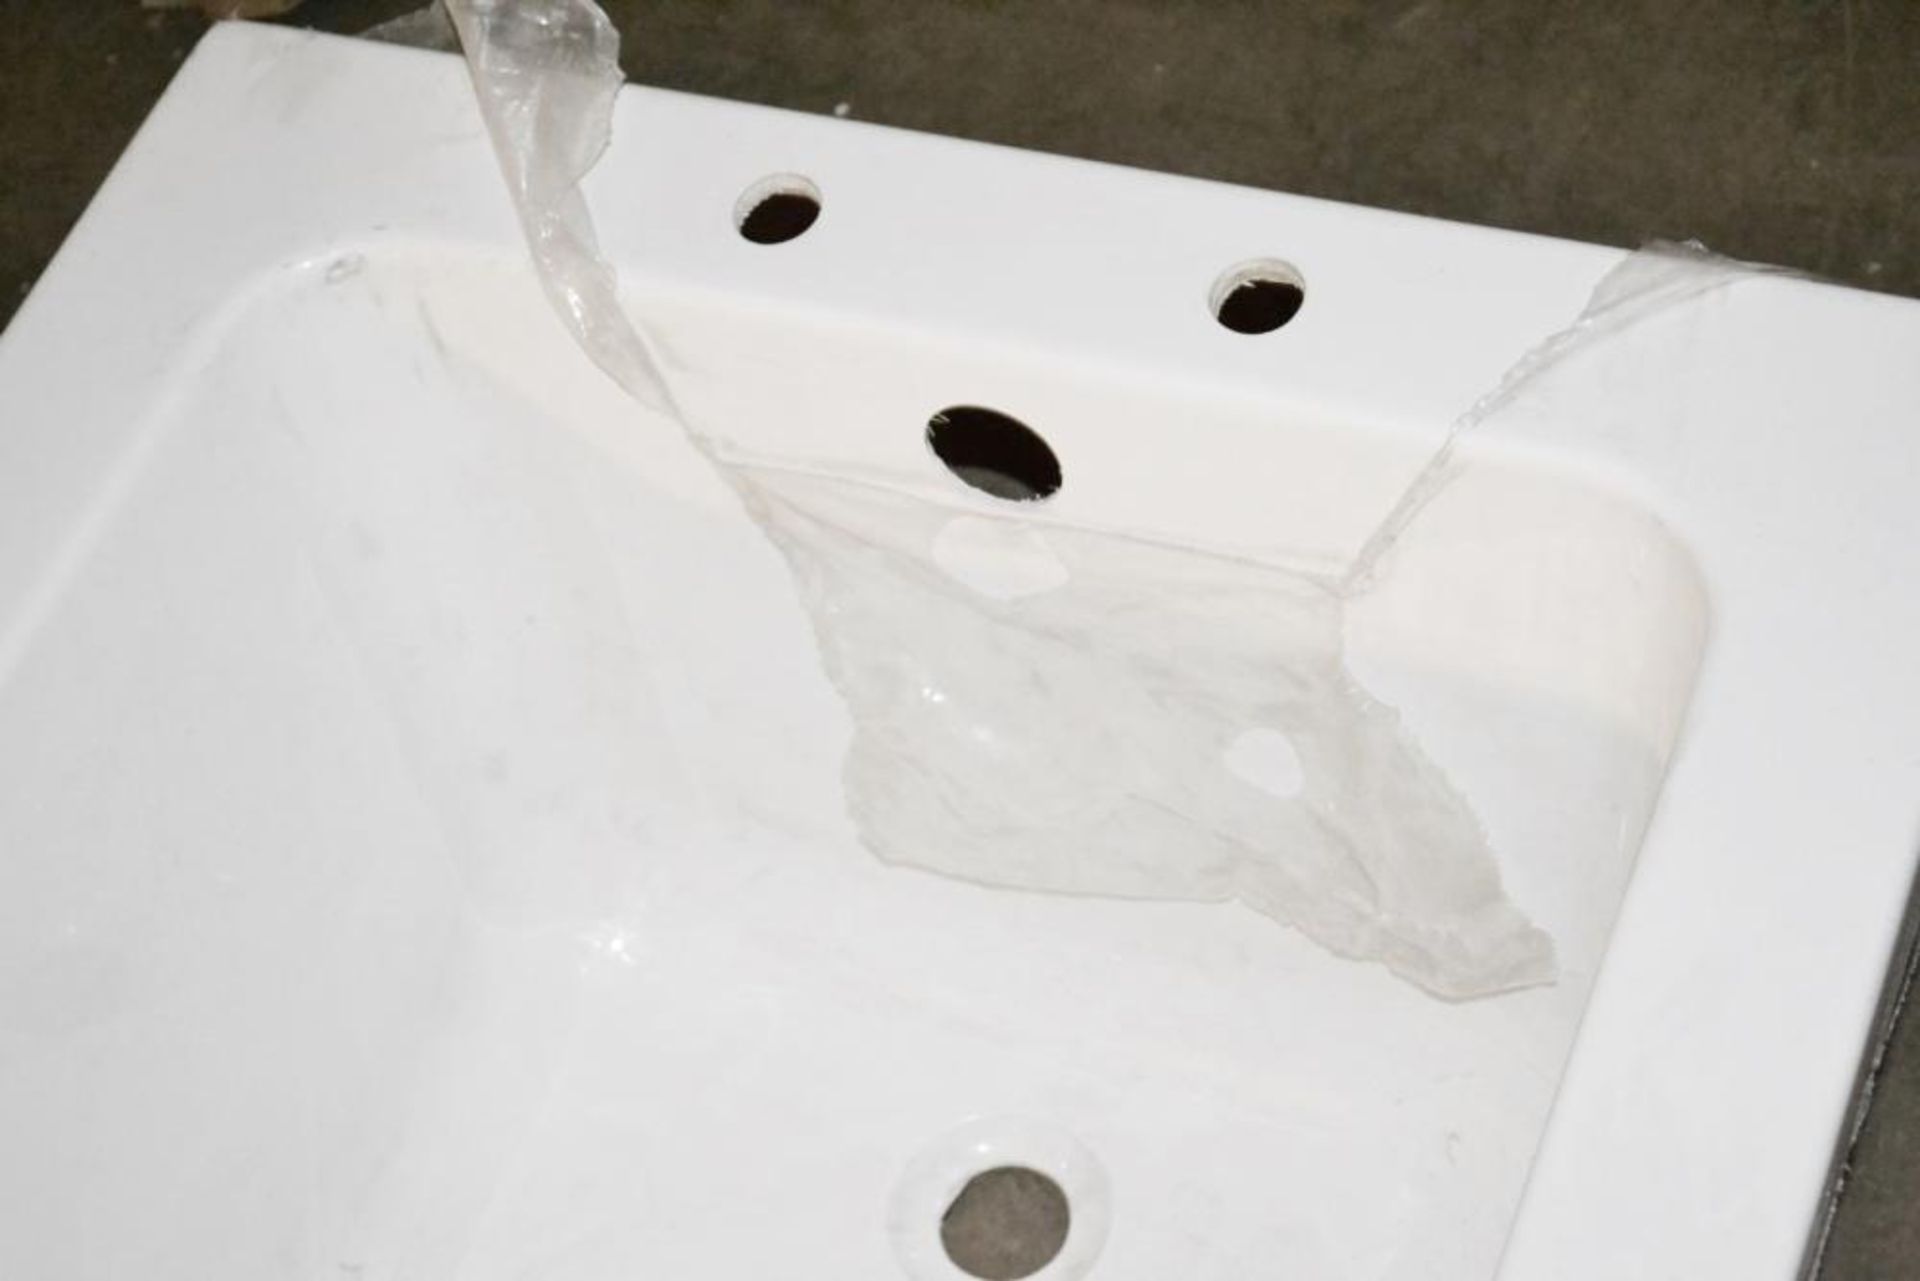 1 x 1700 x 700 Acrylic Straight 2-Tap Hole Bath - New / Unused Stock - CL269 - Ref LH286 - Location: - Image 4 of 4